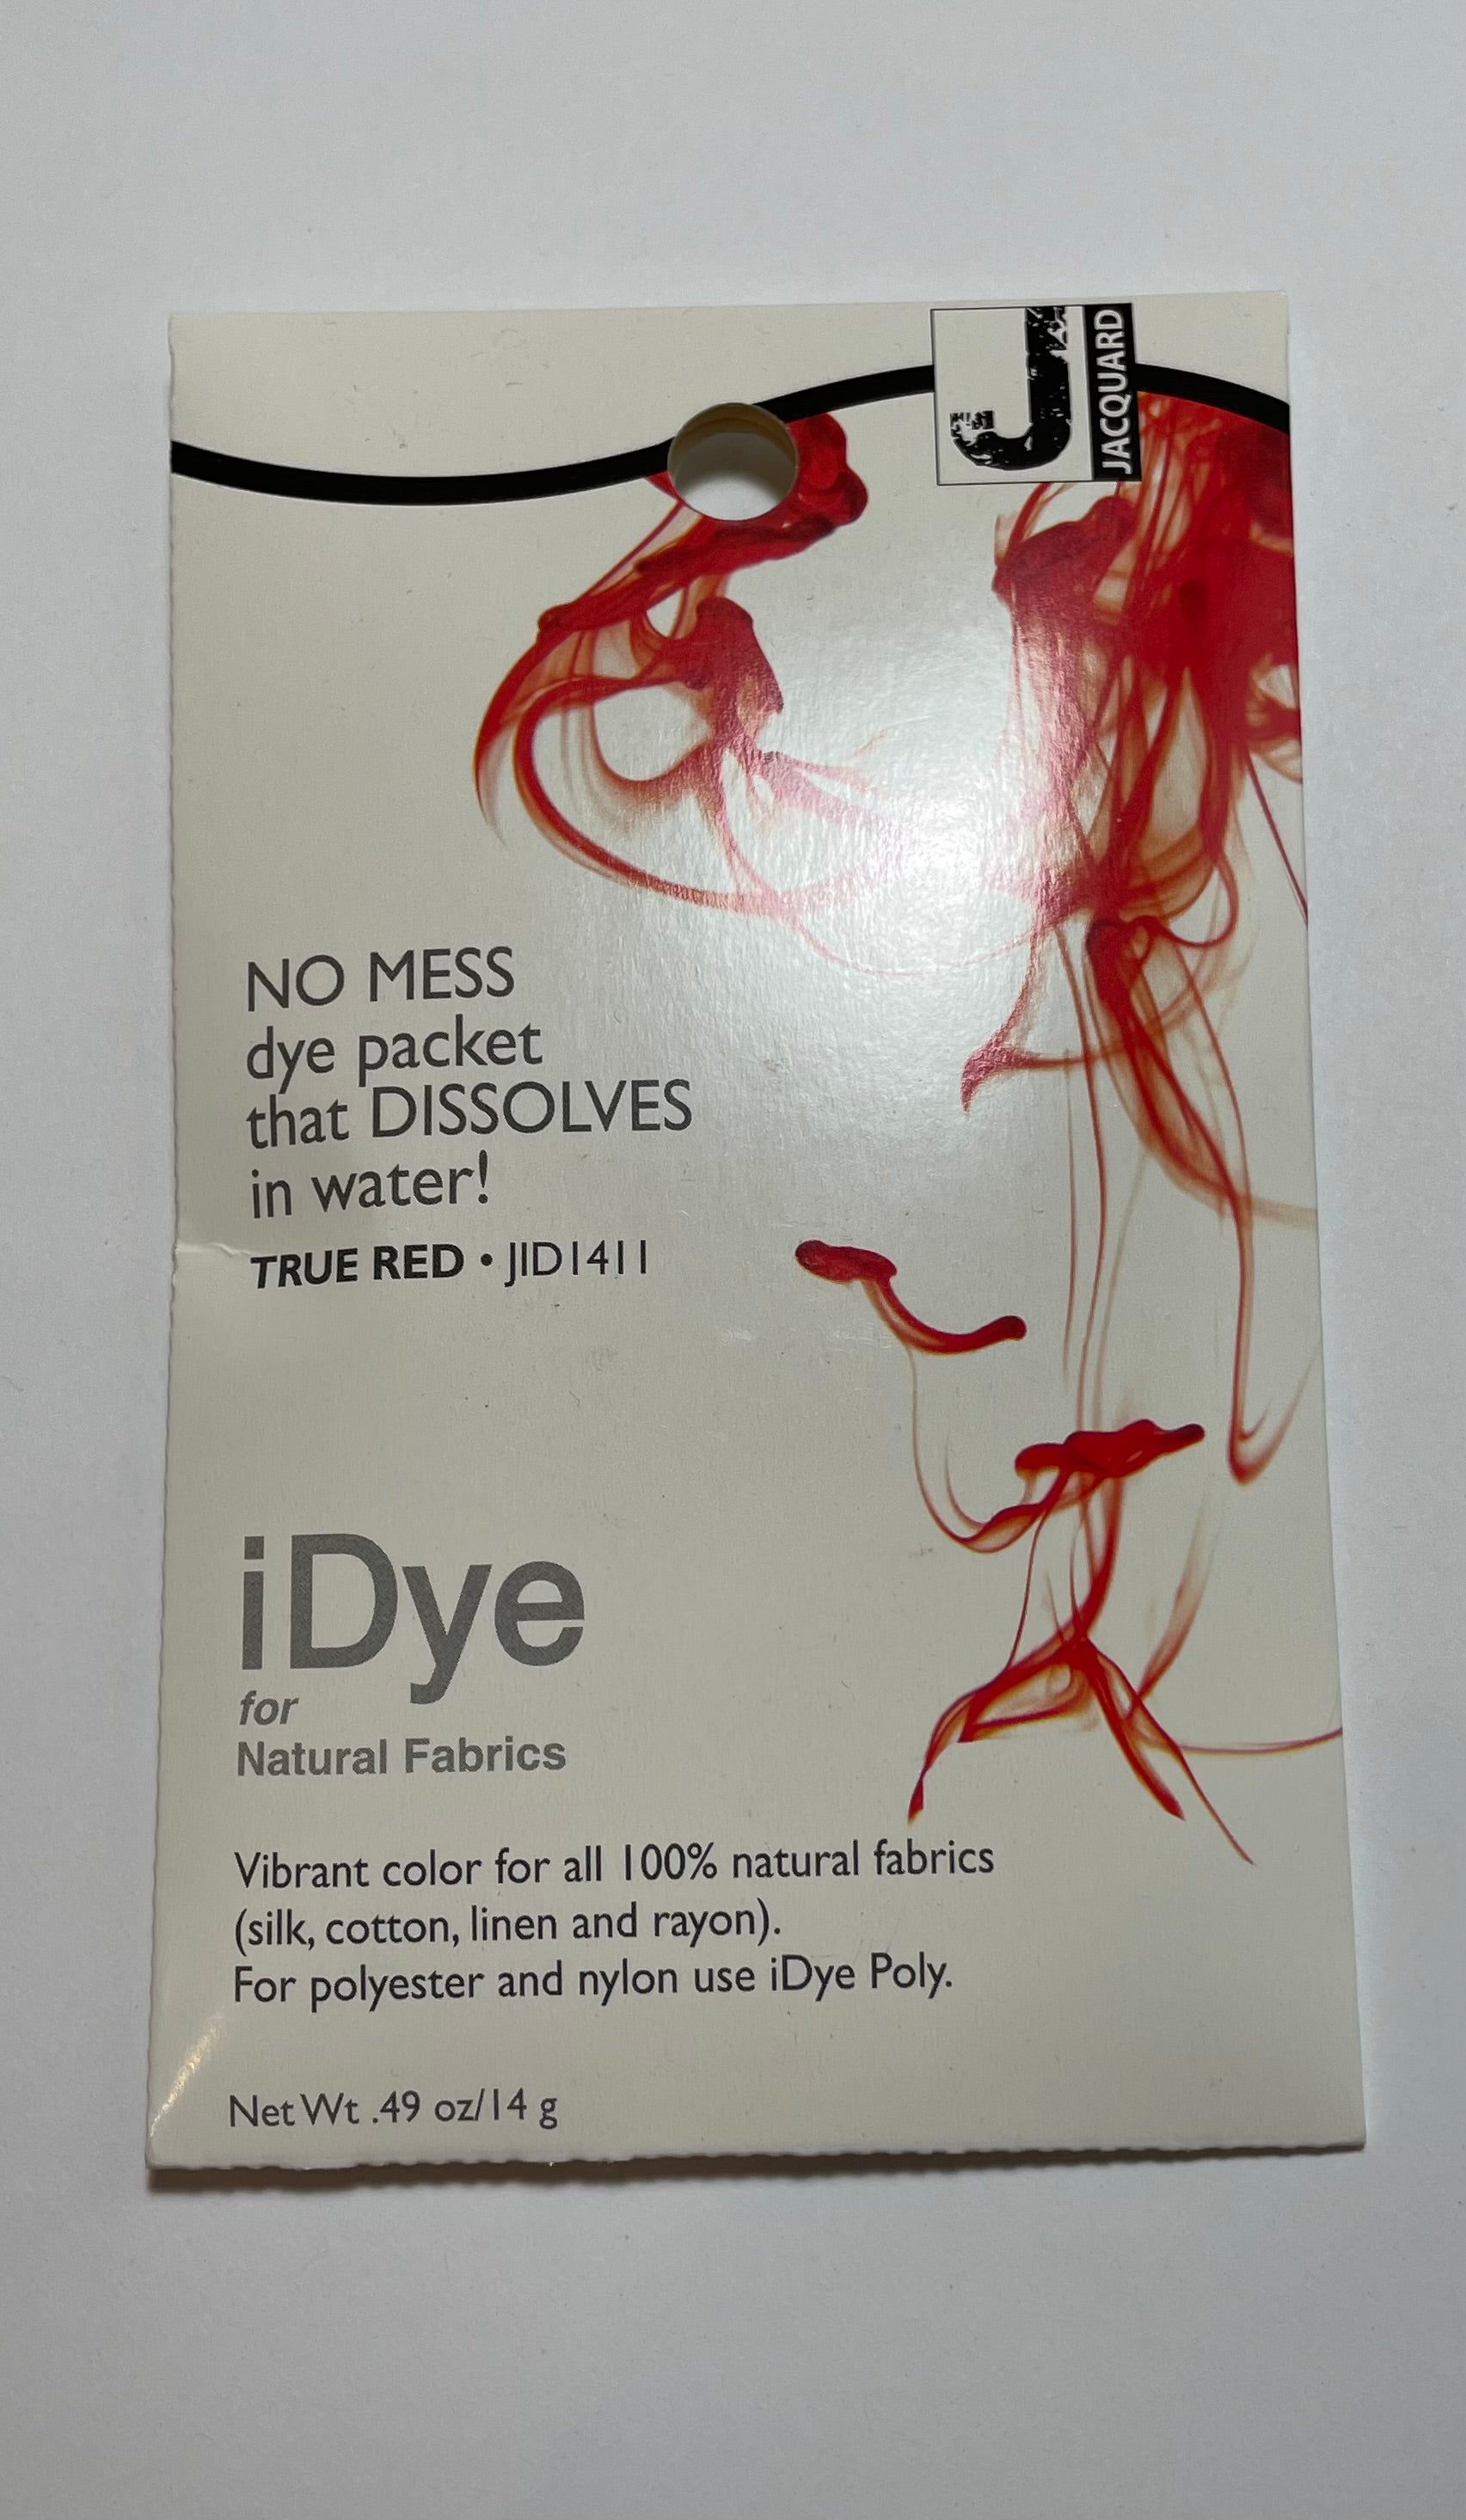 Jacquard Idye Poly Fabric Dye for Polyester, Plastics and Synthetic  Materials -  Canada